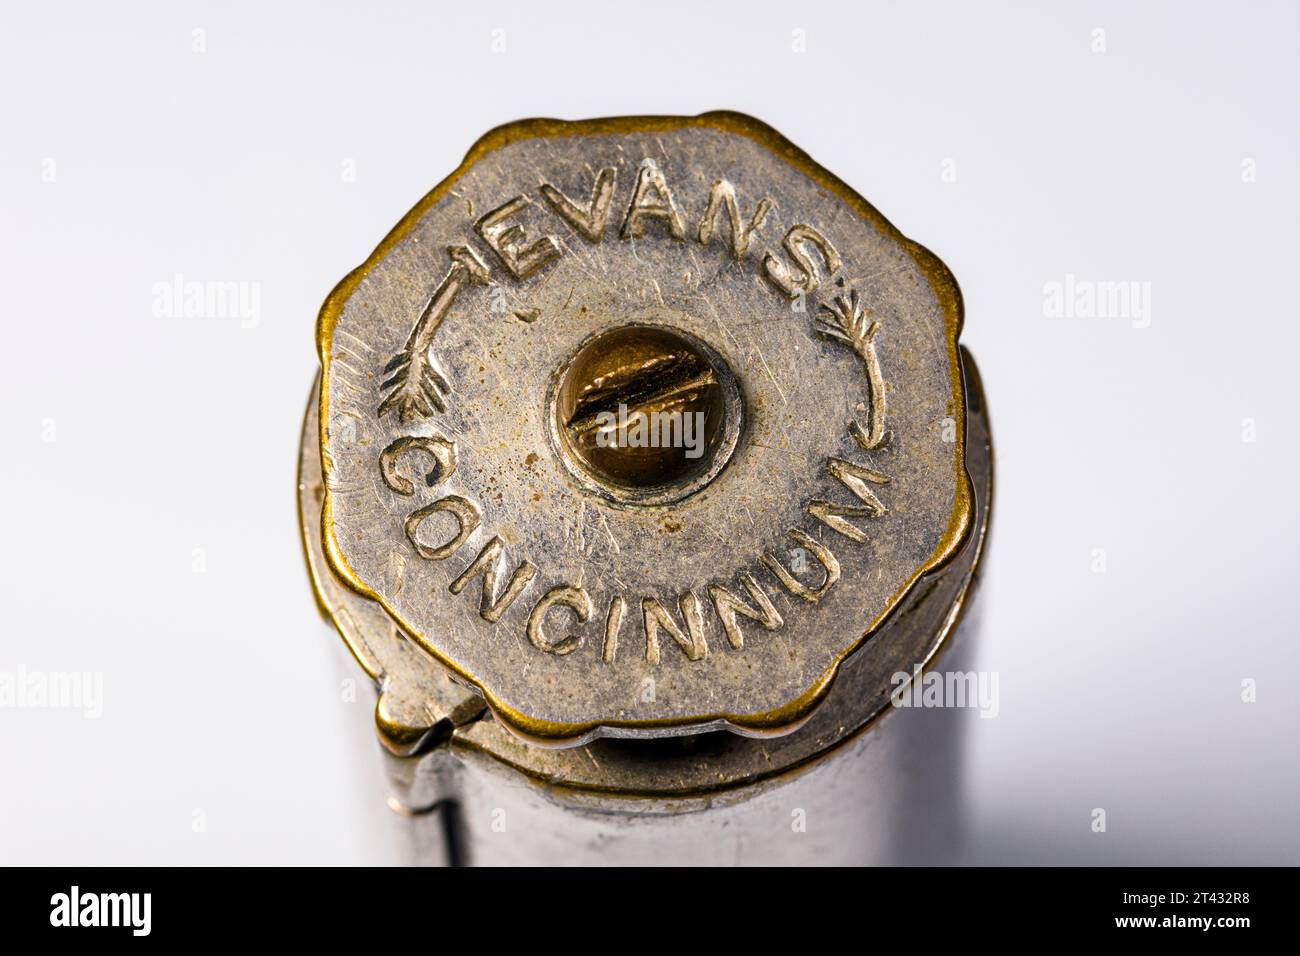 An Evans Patent Concinnum Machine, a vintage cigarette rolling device.  End view showing the knob which turns the brass rollers. Stock Photo